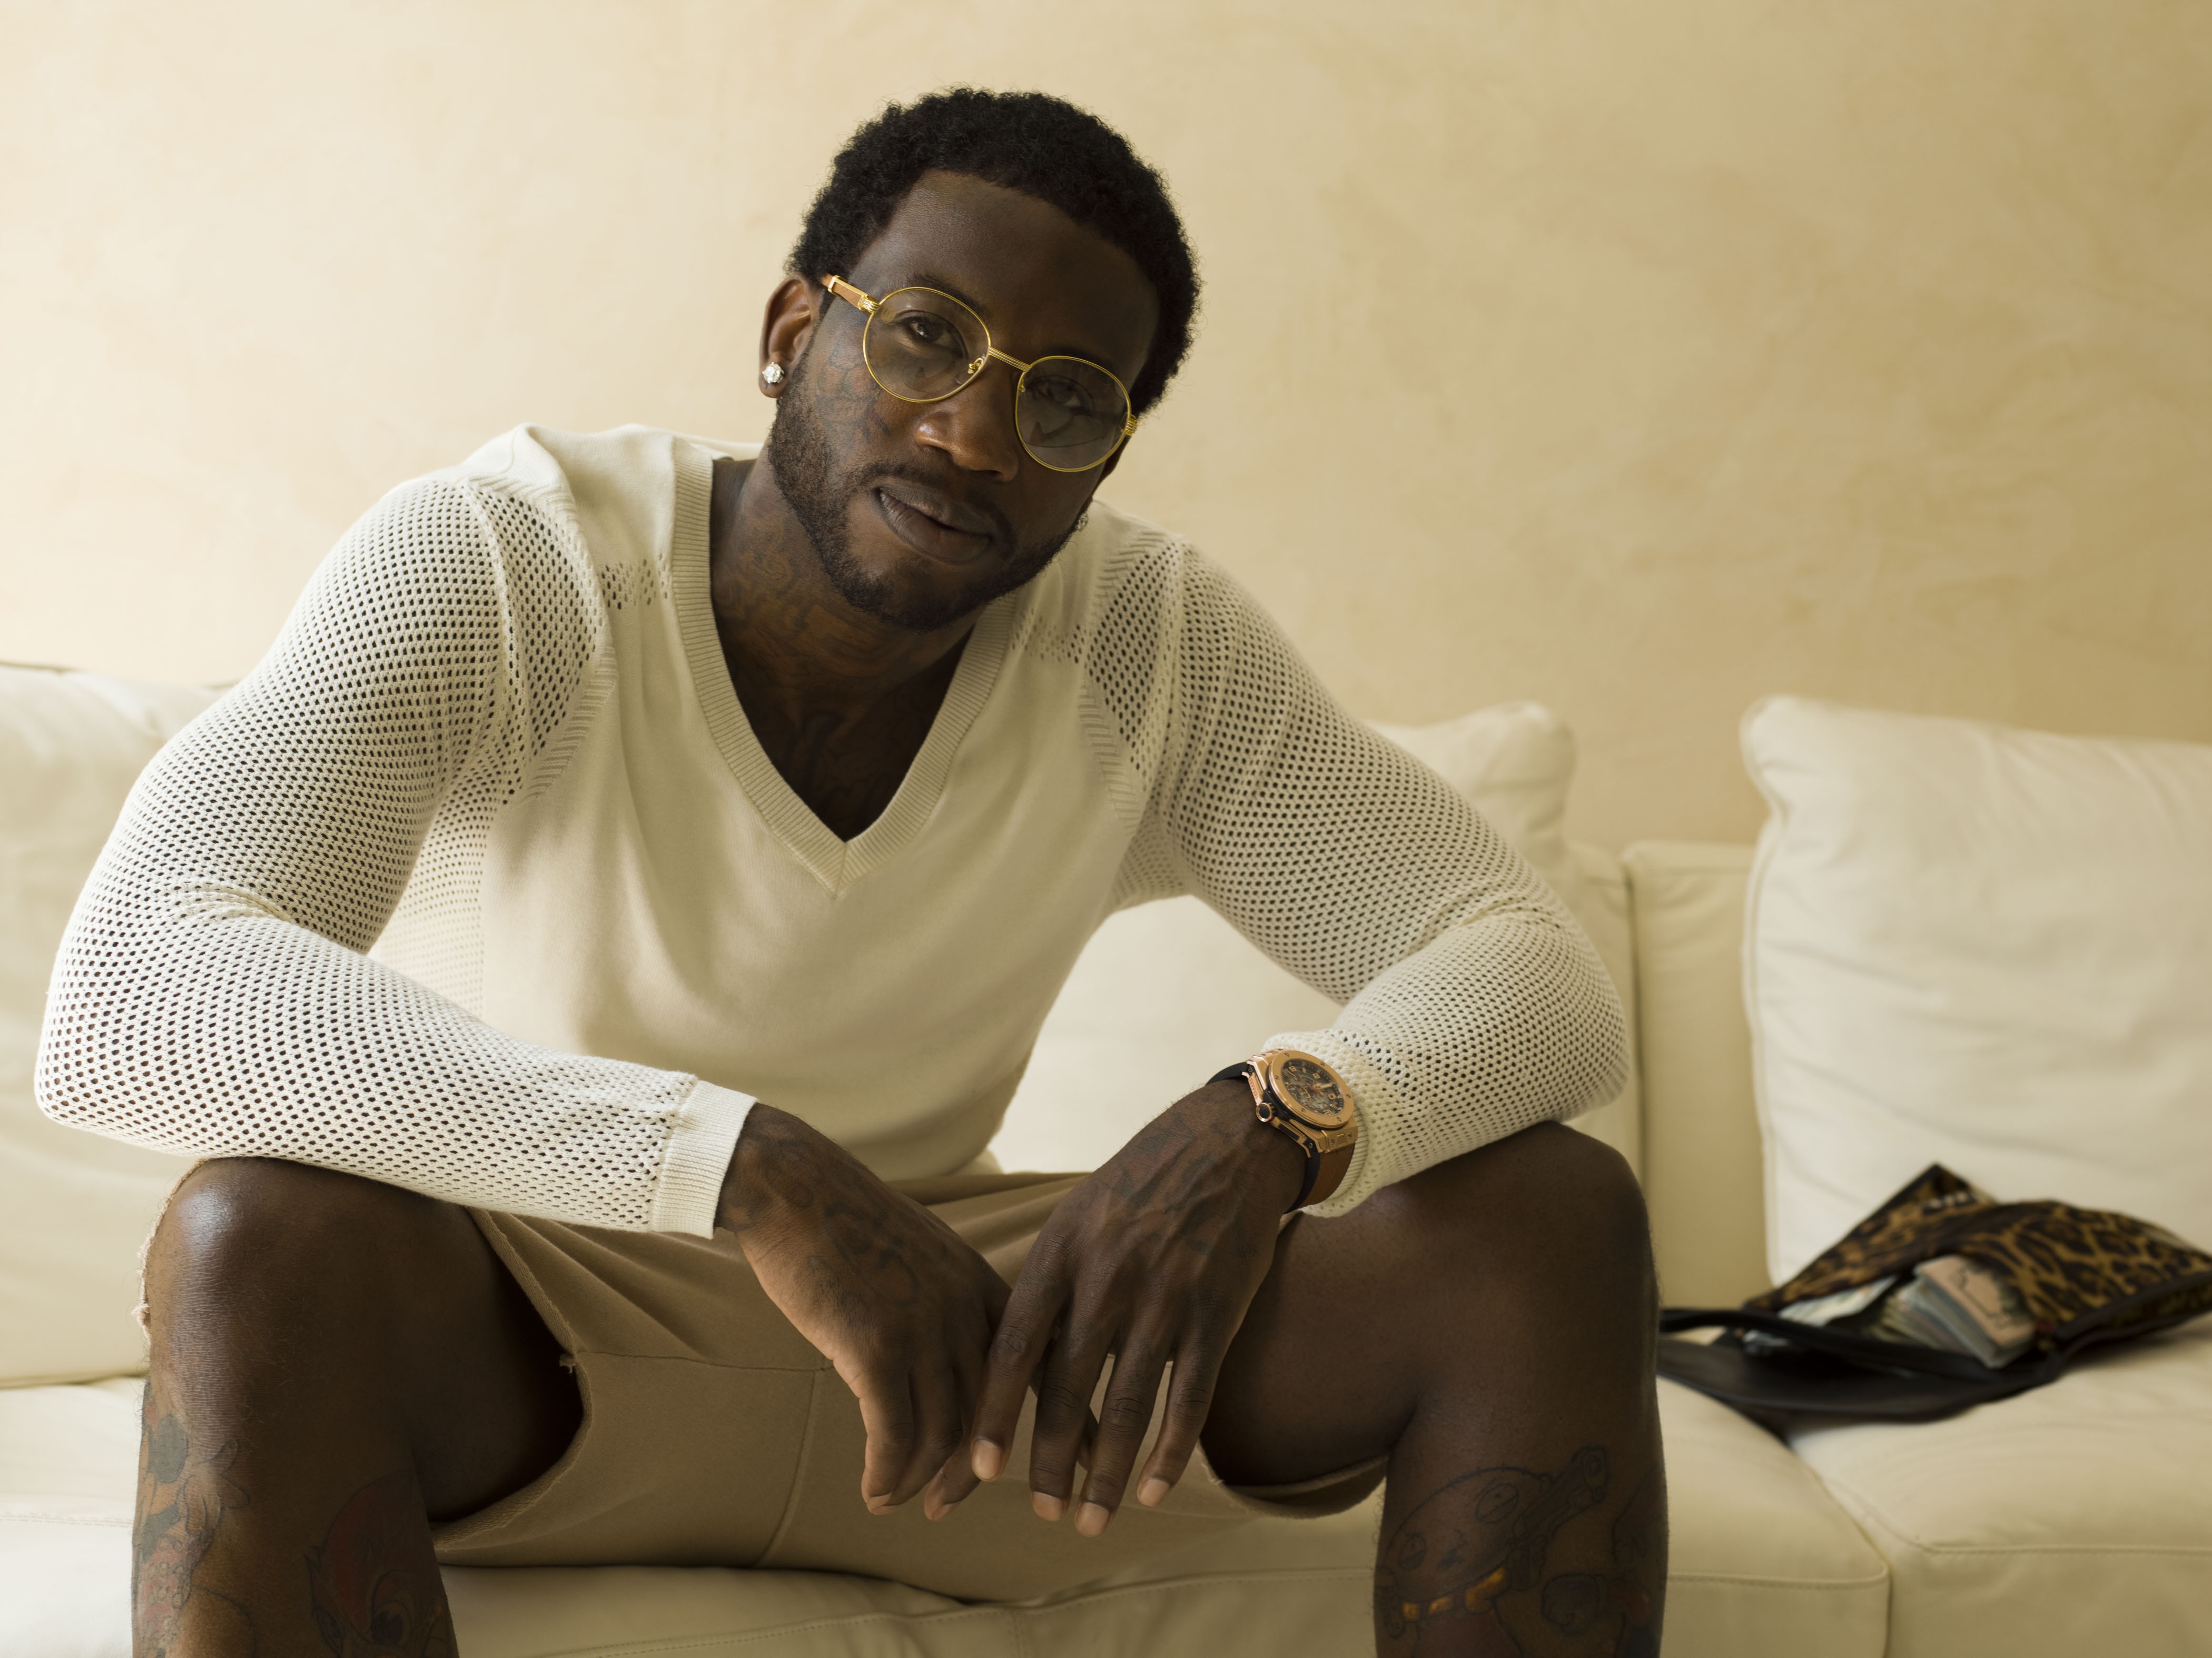 Following his release from prison, Atlanta rapper Gucci Mane debuts new music ... and a new persona | Stories & Interviews Orlando | Orlando Weekly